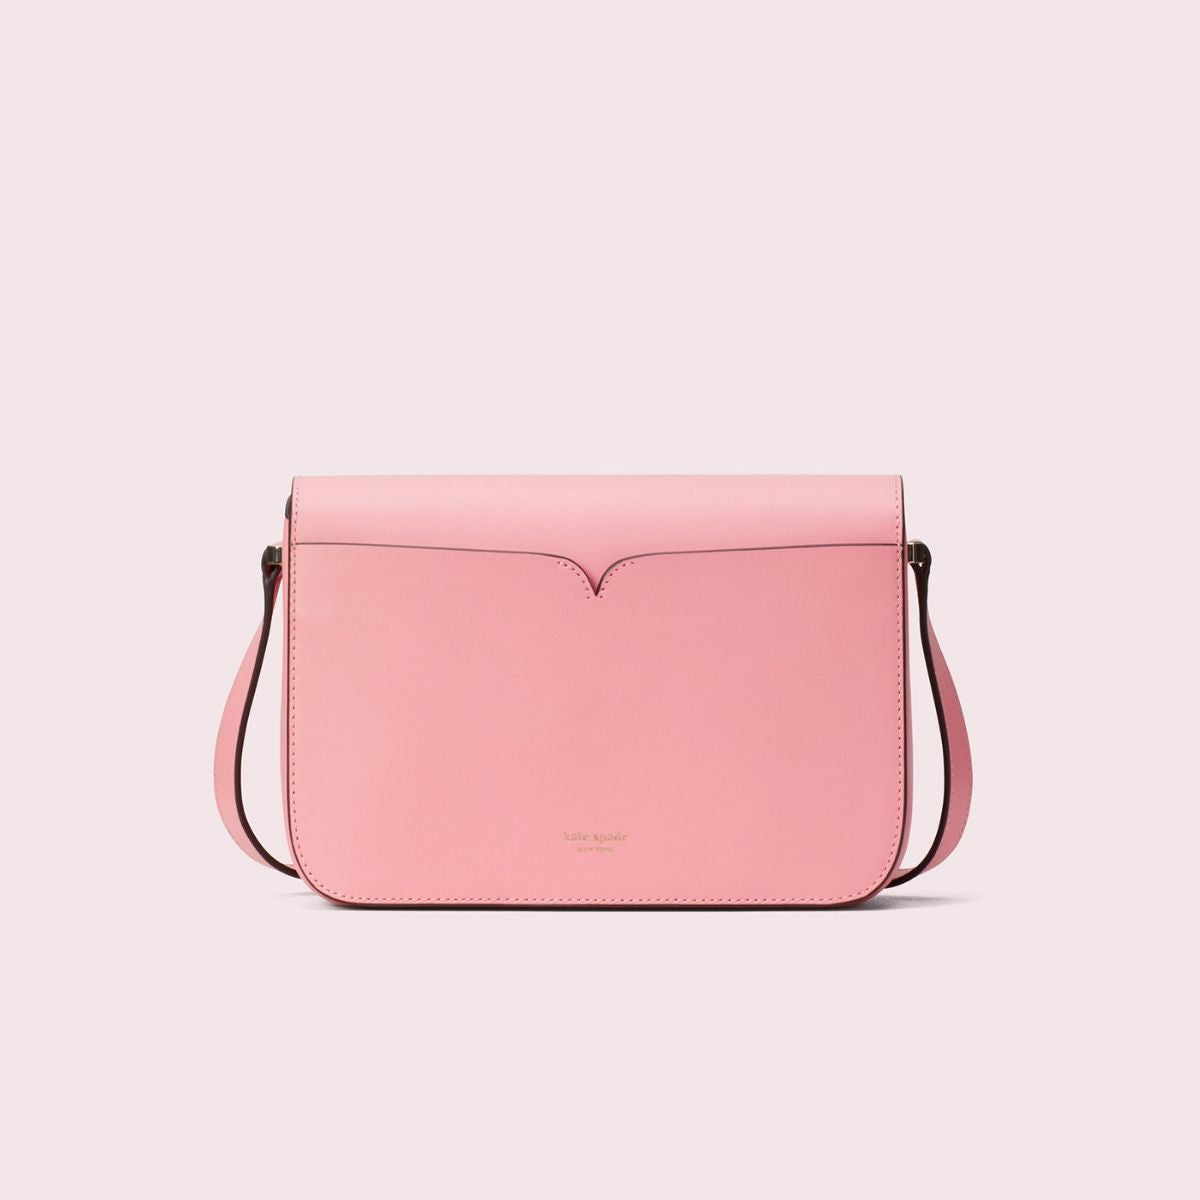 Pink Shoulder Bag With Flap Pocket Twist Lock Fashionable For Daily PU